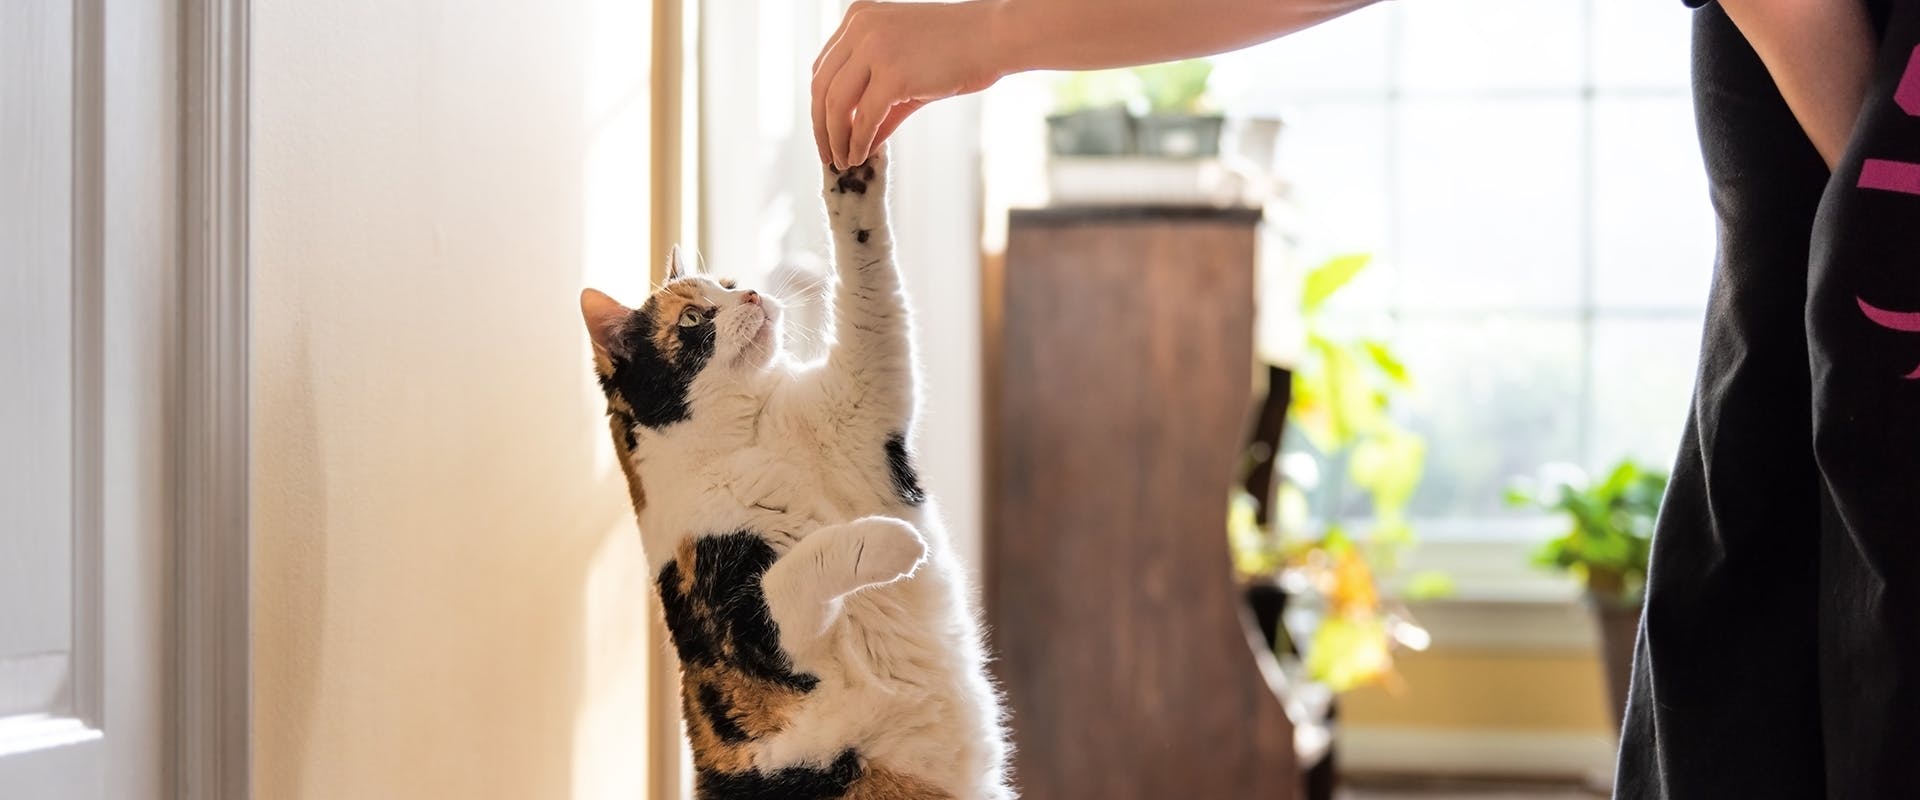 A cat reaching up to receive a treat from its owner